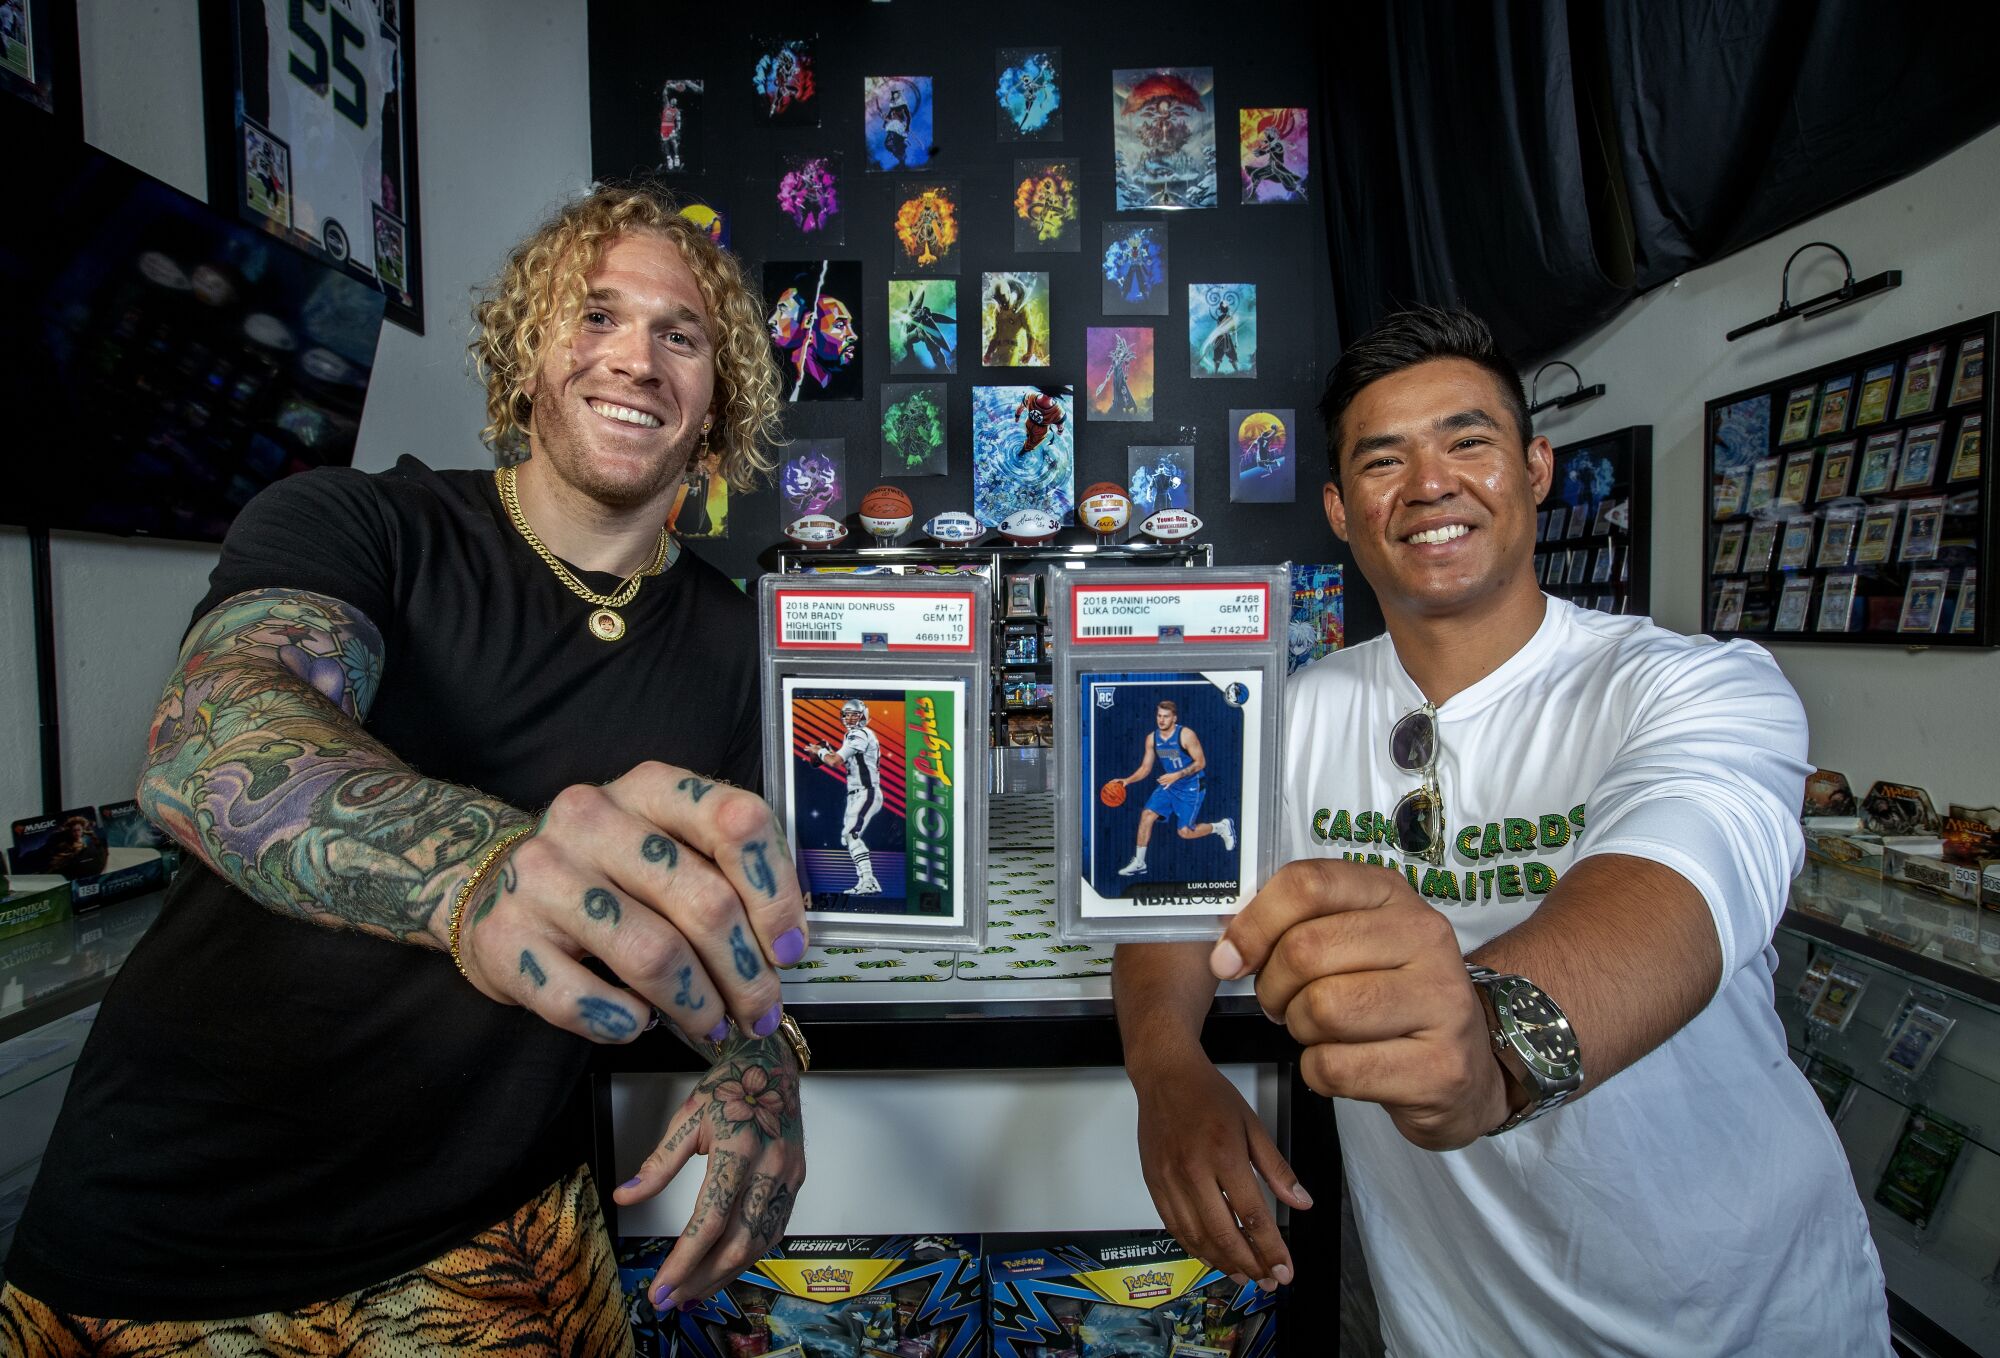 Cassius Marsh, left, and friend Nick Nugwynne, co-founders of Cash Cards Unlimited, are photographed inside their business.